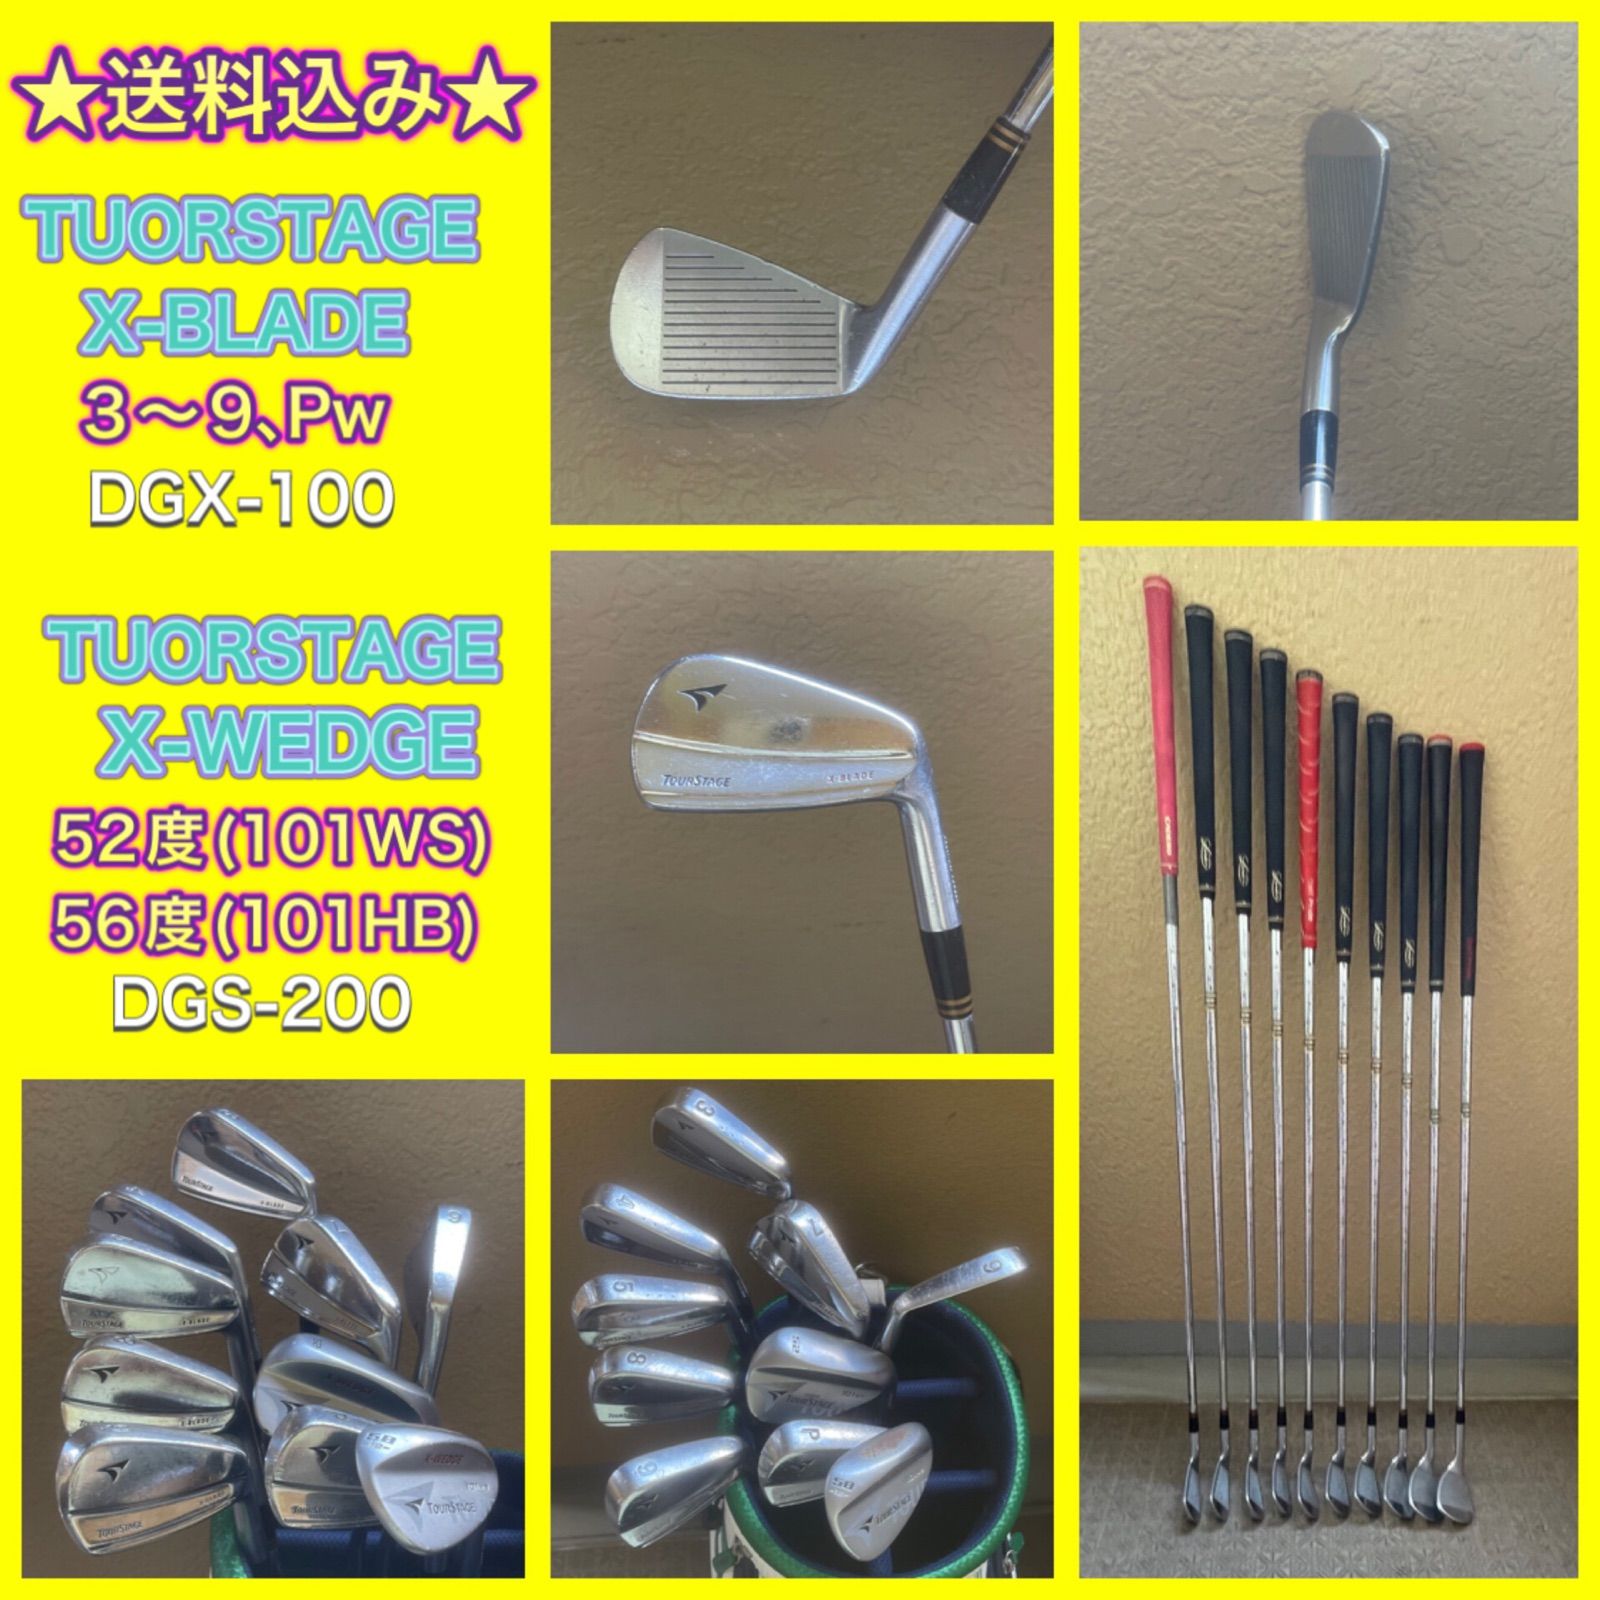 【TOURSTAGE】X-WEDGE 03 (52°,60°)2本セット